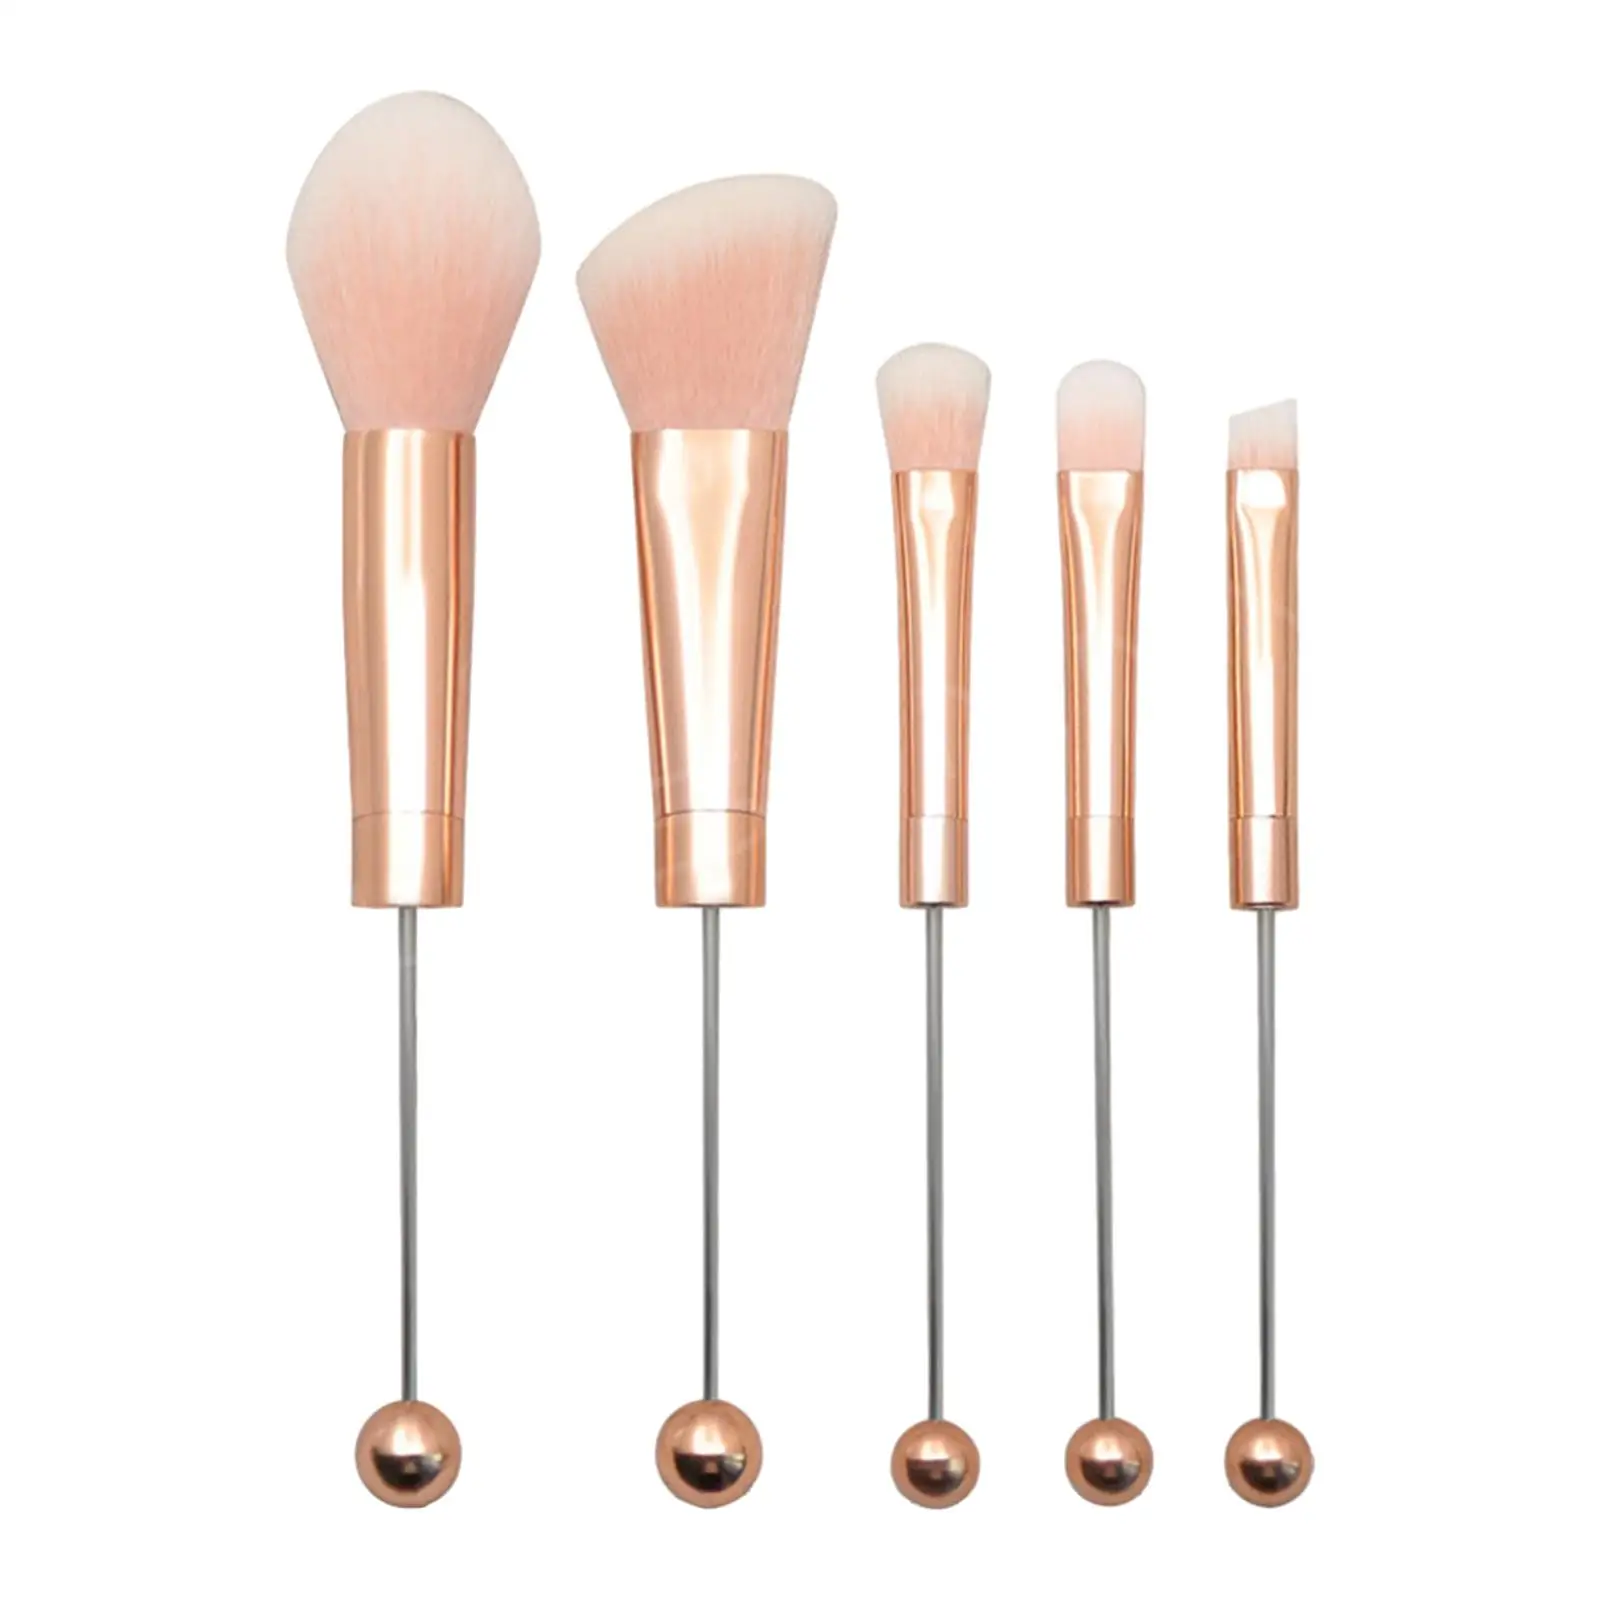 5 Pieces Makeup Brushes Set Multifunctional Blush Brush Make up Brushes Tool Kits Professional for Lady Sister Birthday Gifts